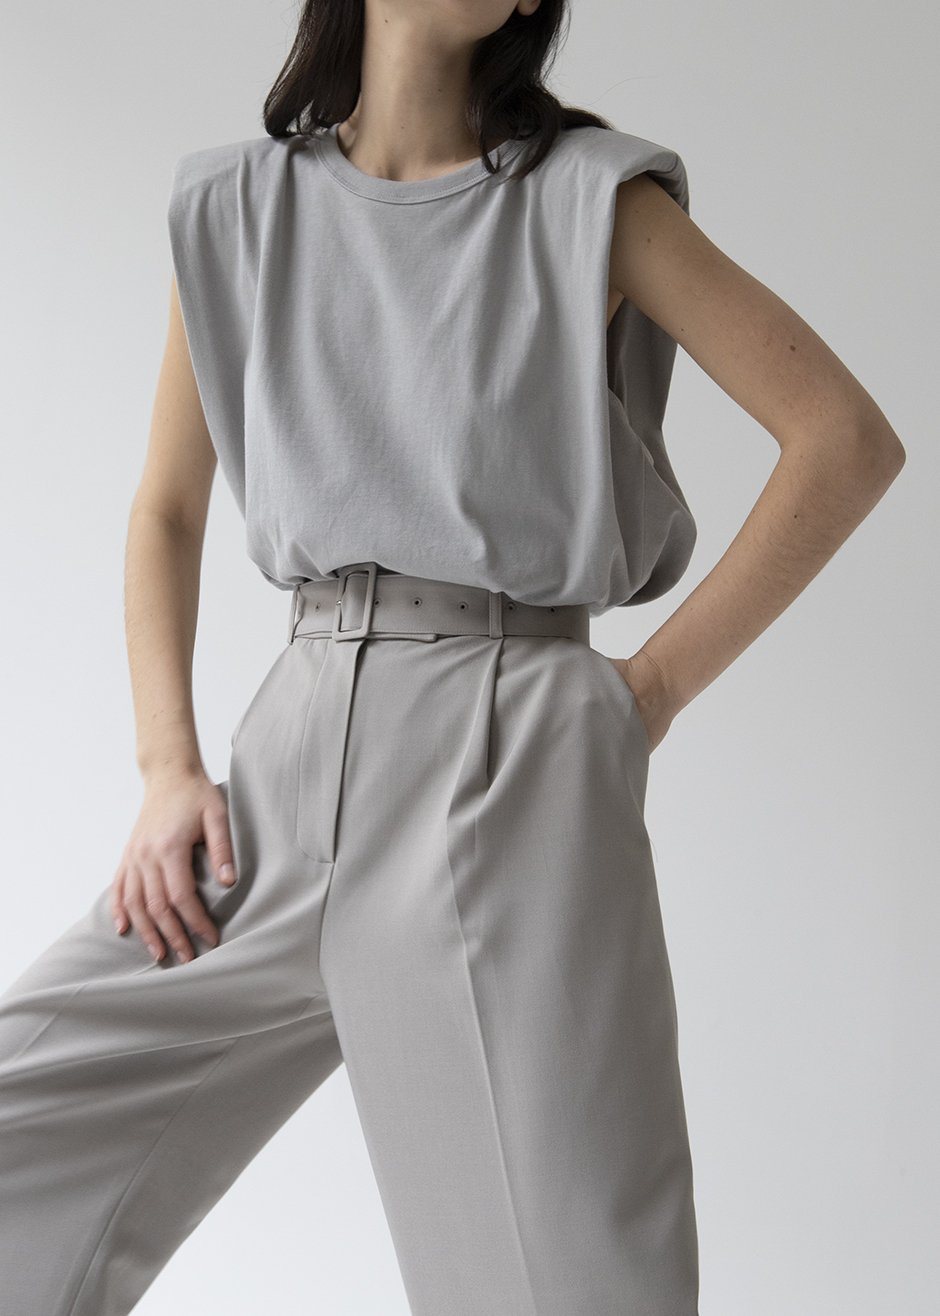 Eva Padded Shoulder Muscle T-Shirt in Grey - 2